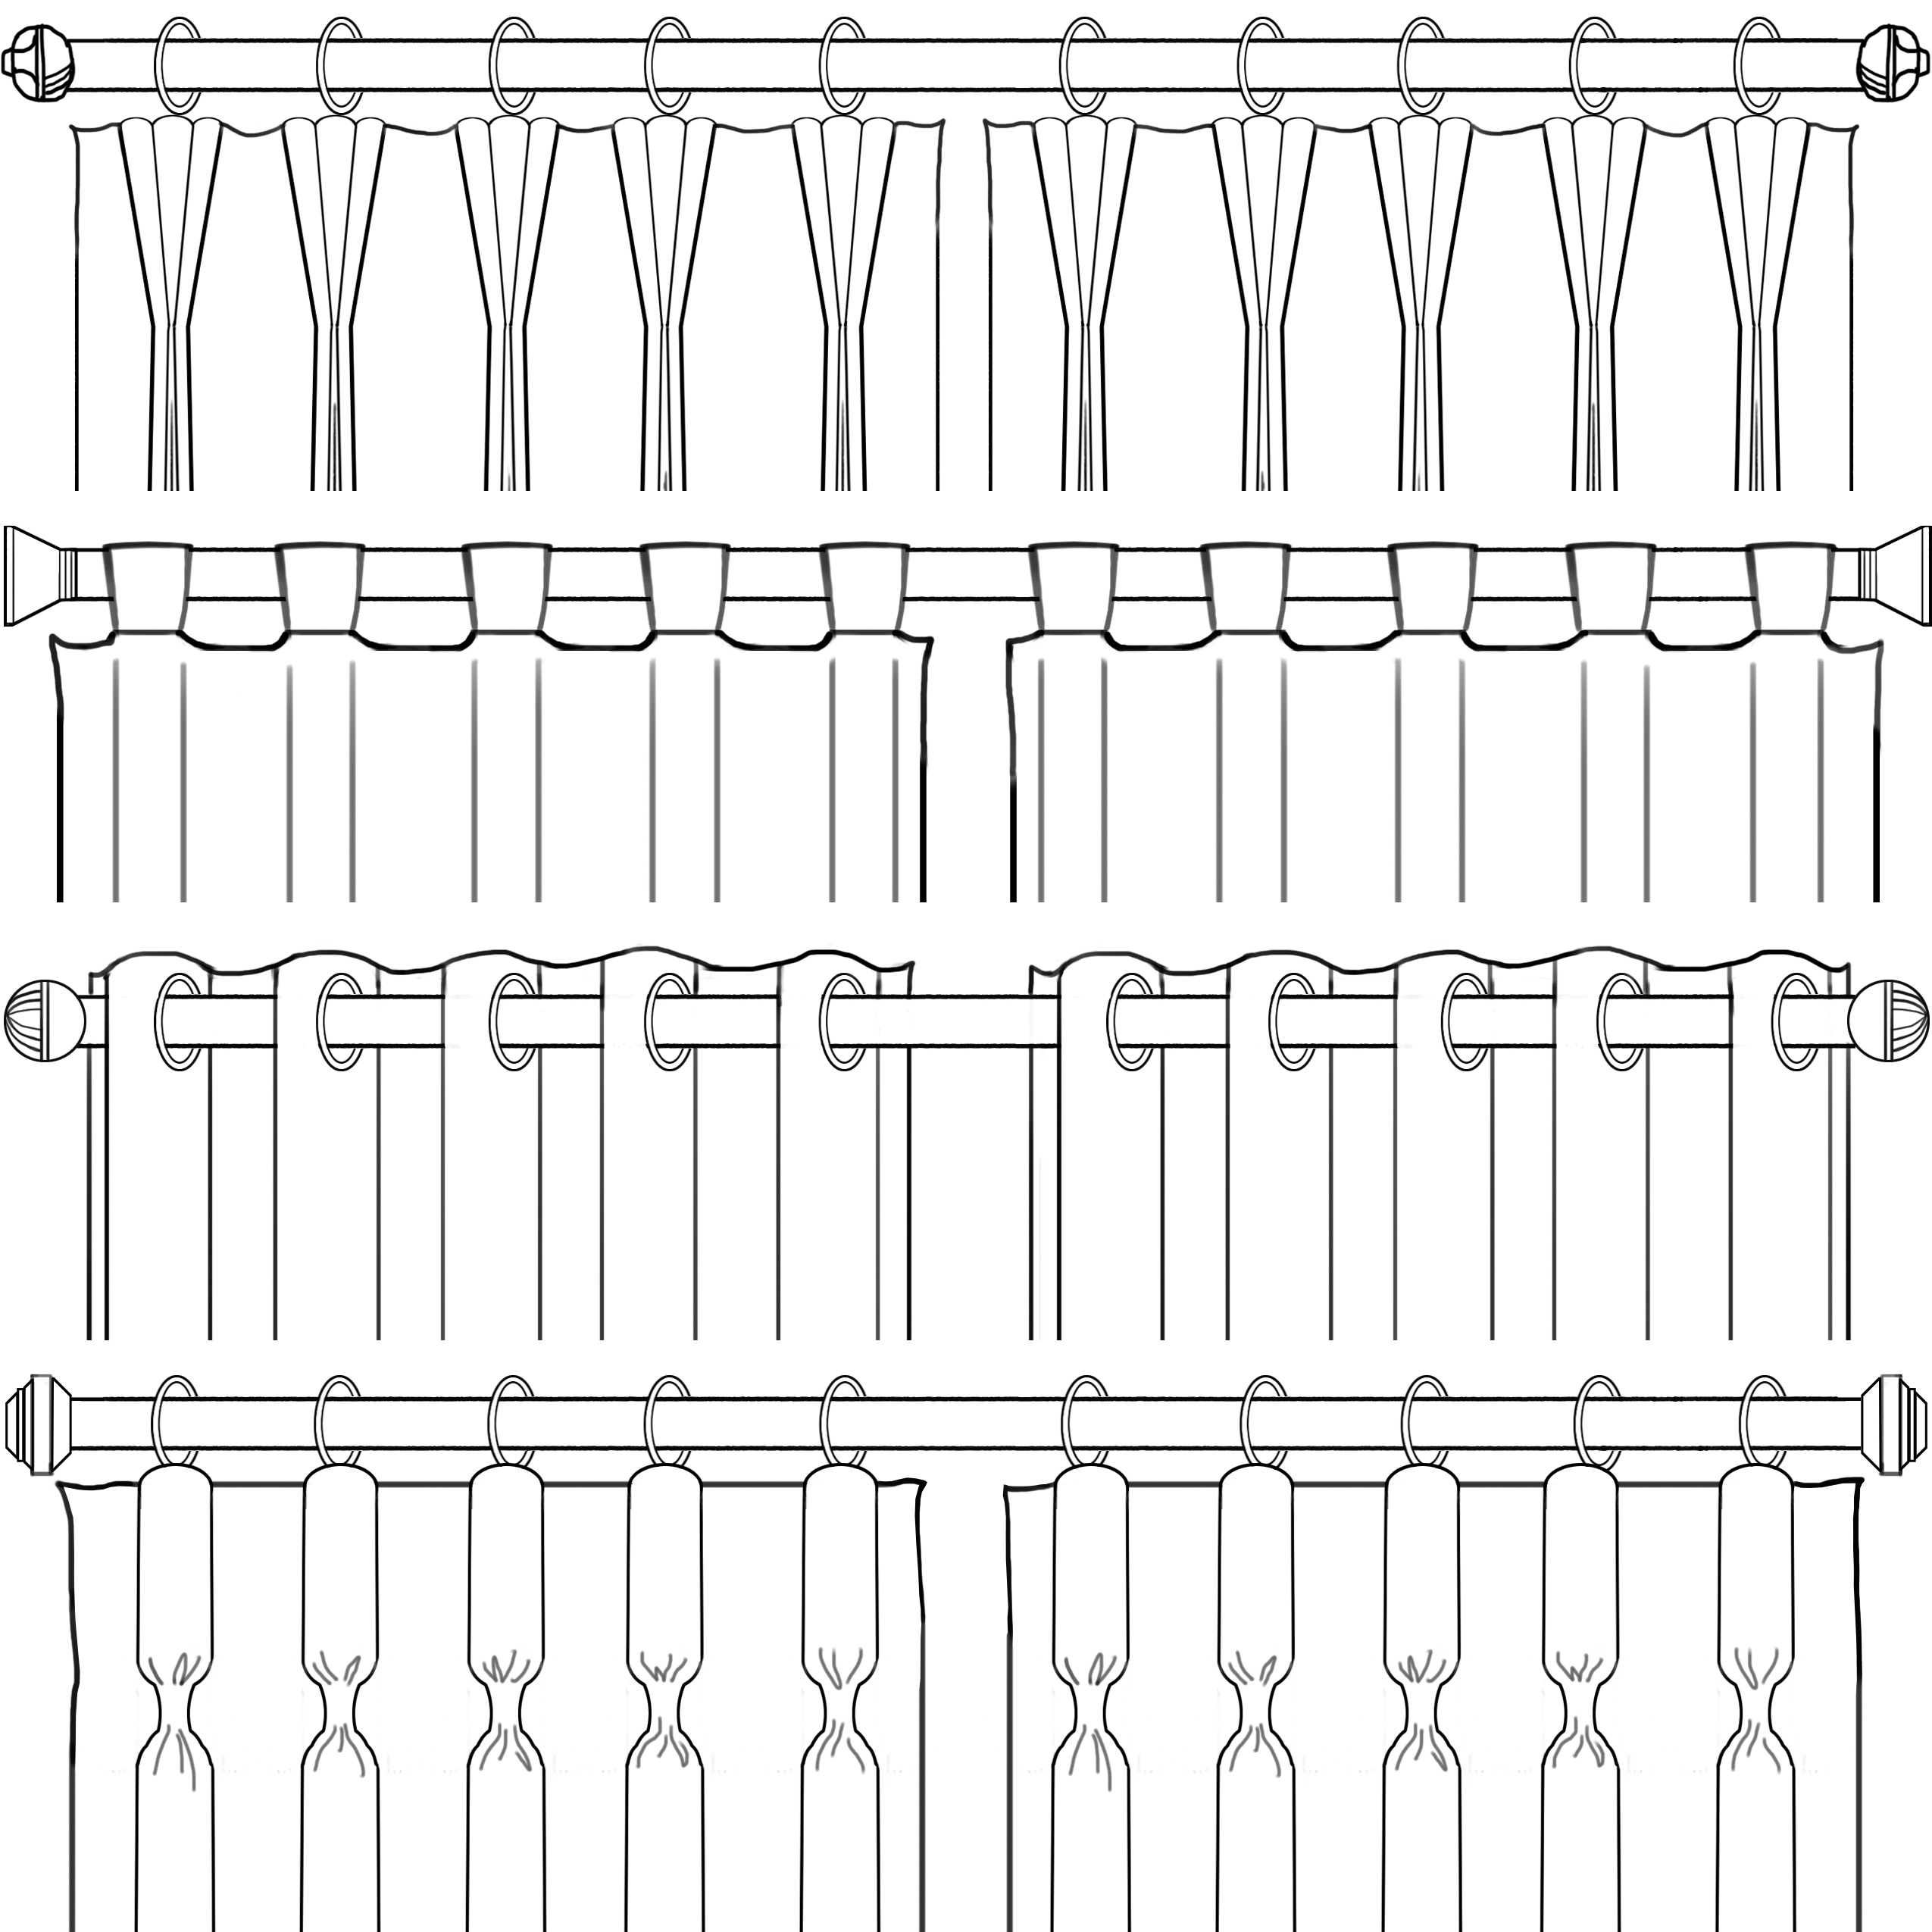 How to choose curtain headers